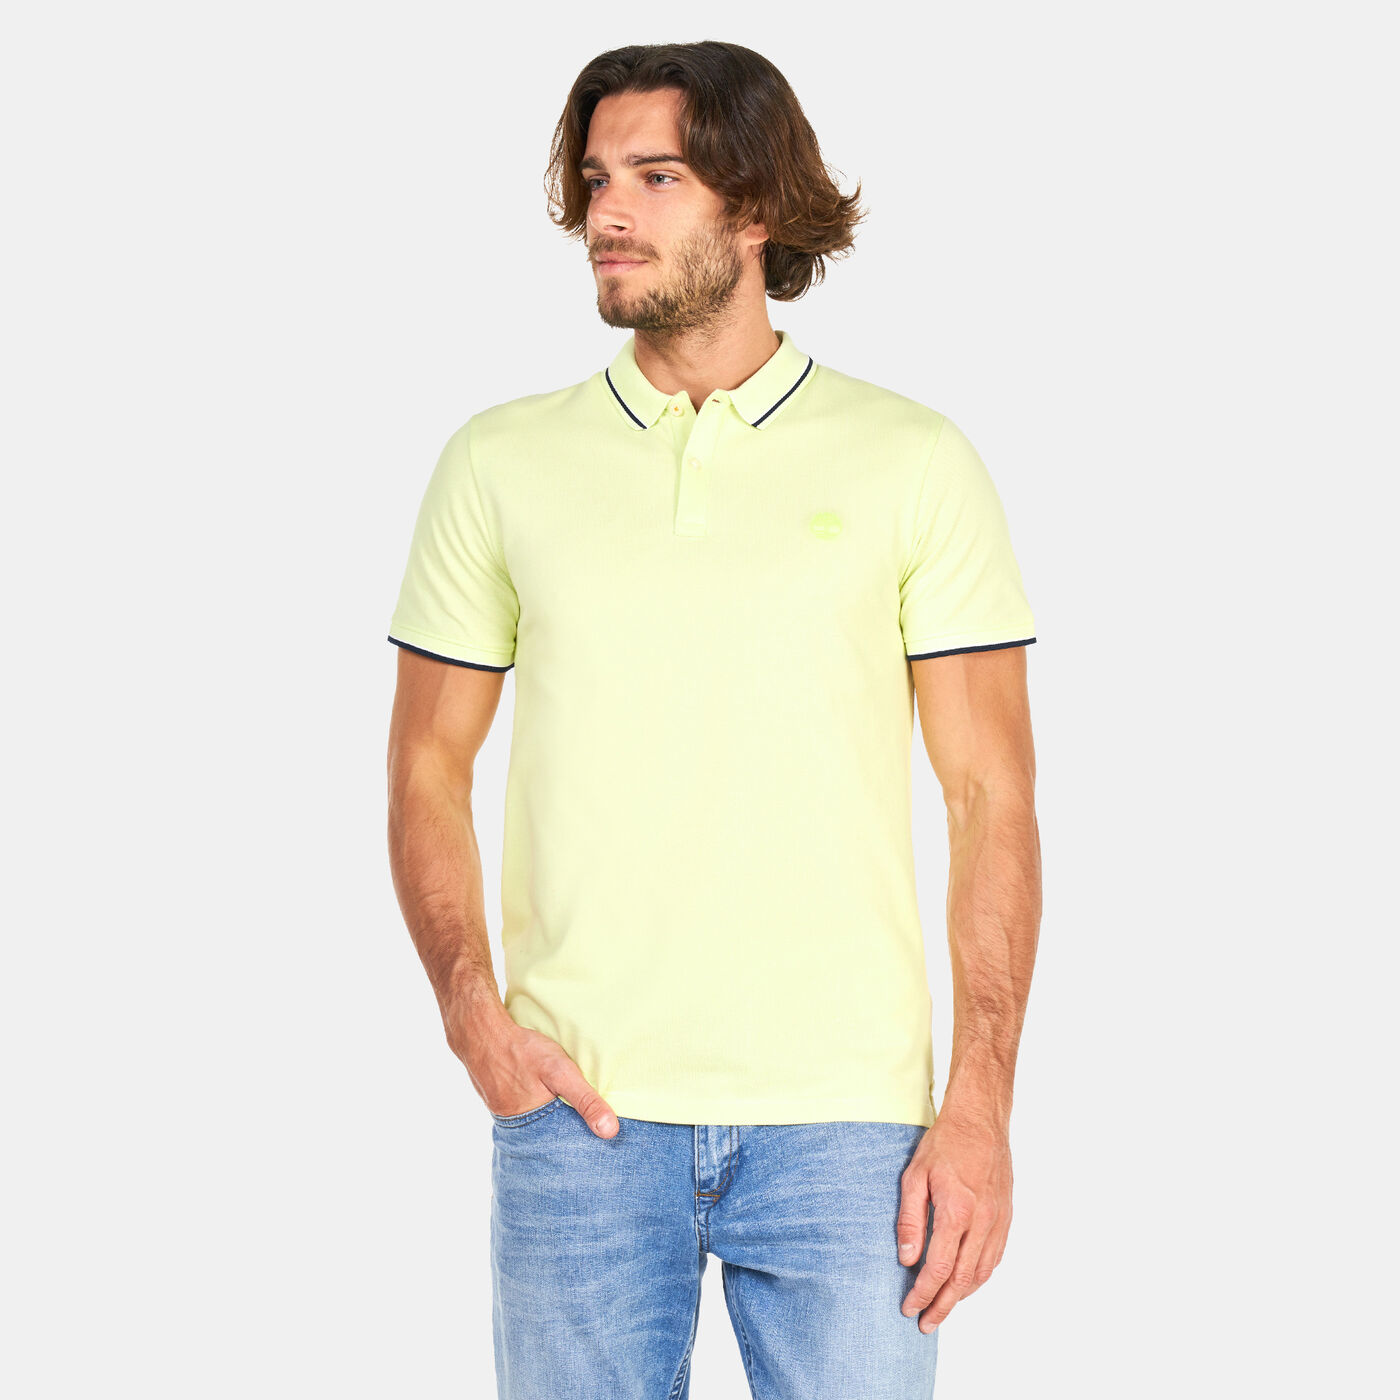 Men's Millers River Tipped Pique Polo T-Shirt